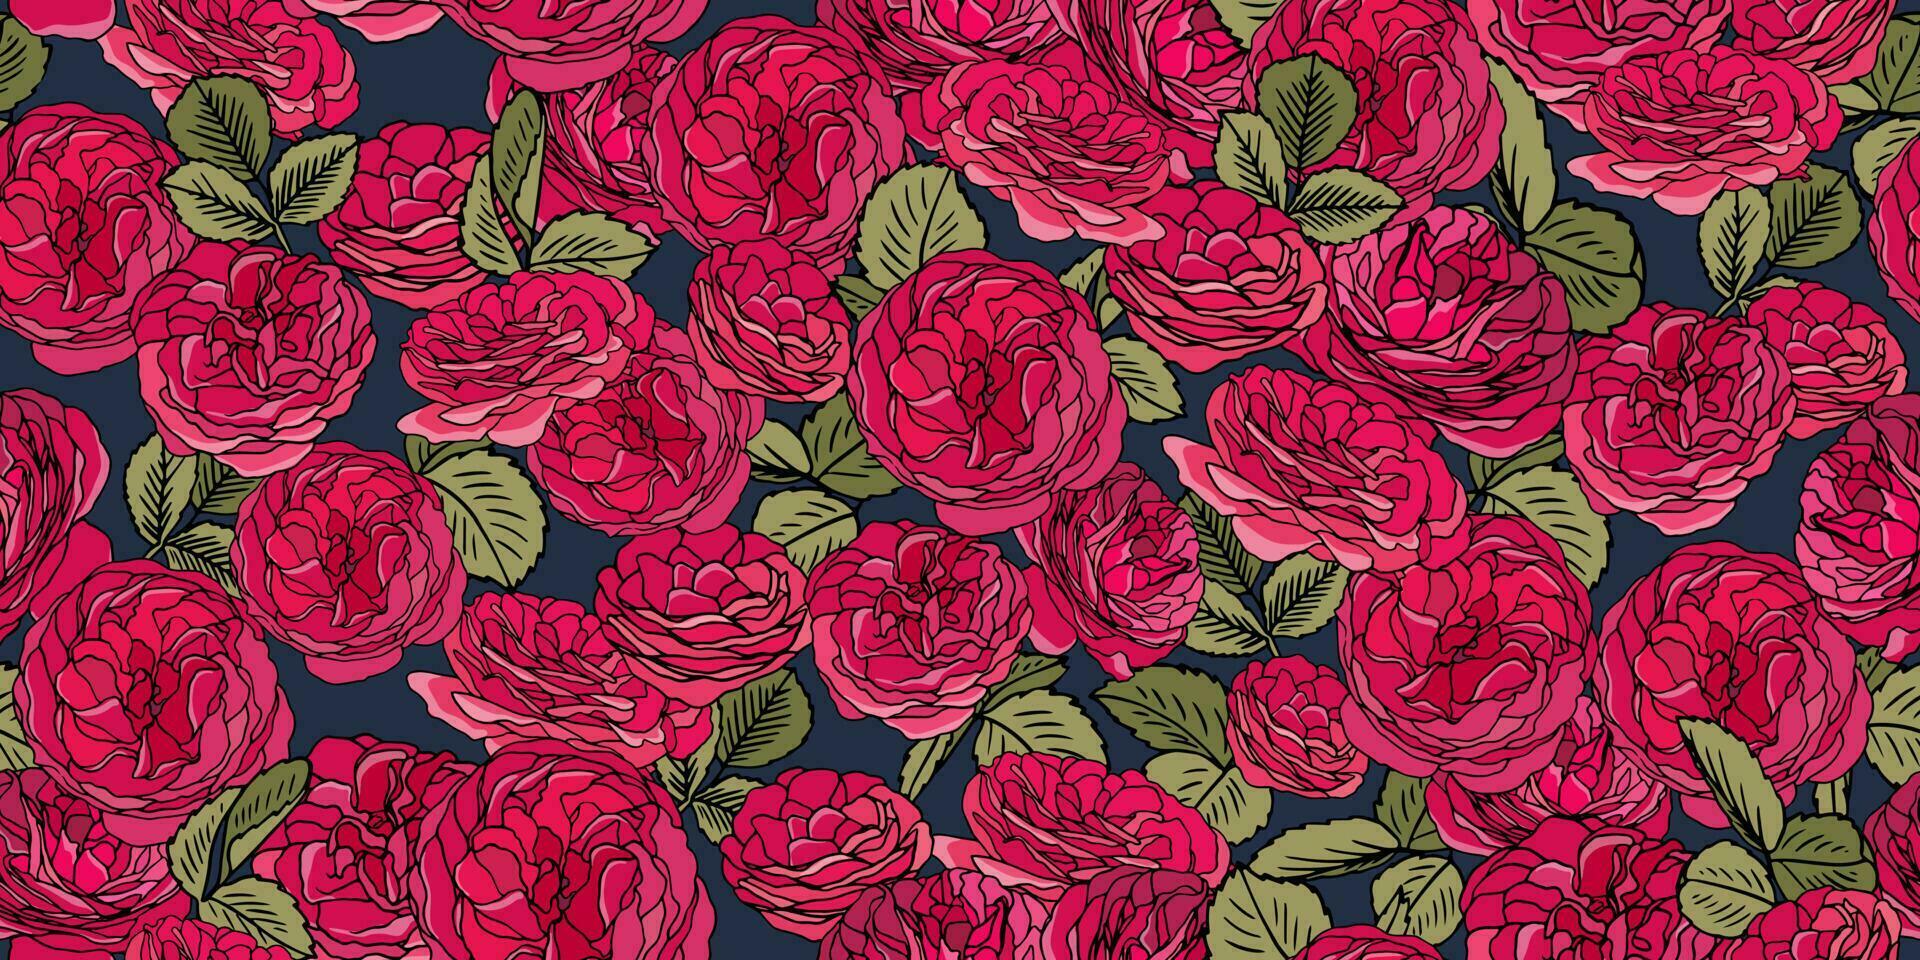 Seamless pattern with pink tea roses on dark blue background. Vintage linear print with garden roses vector